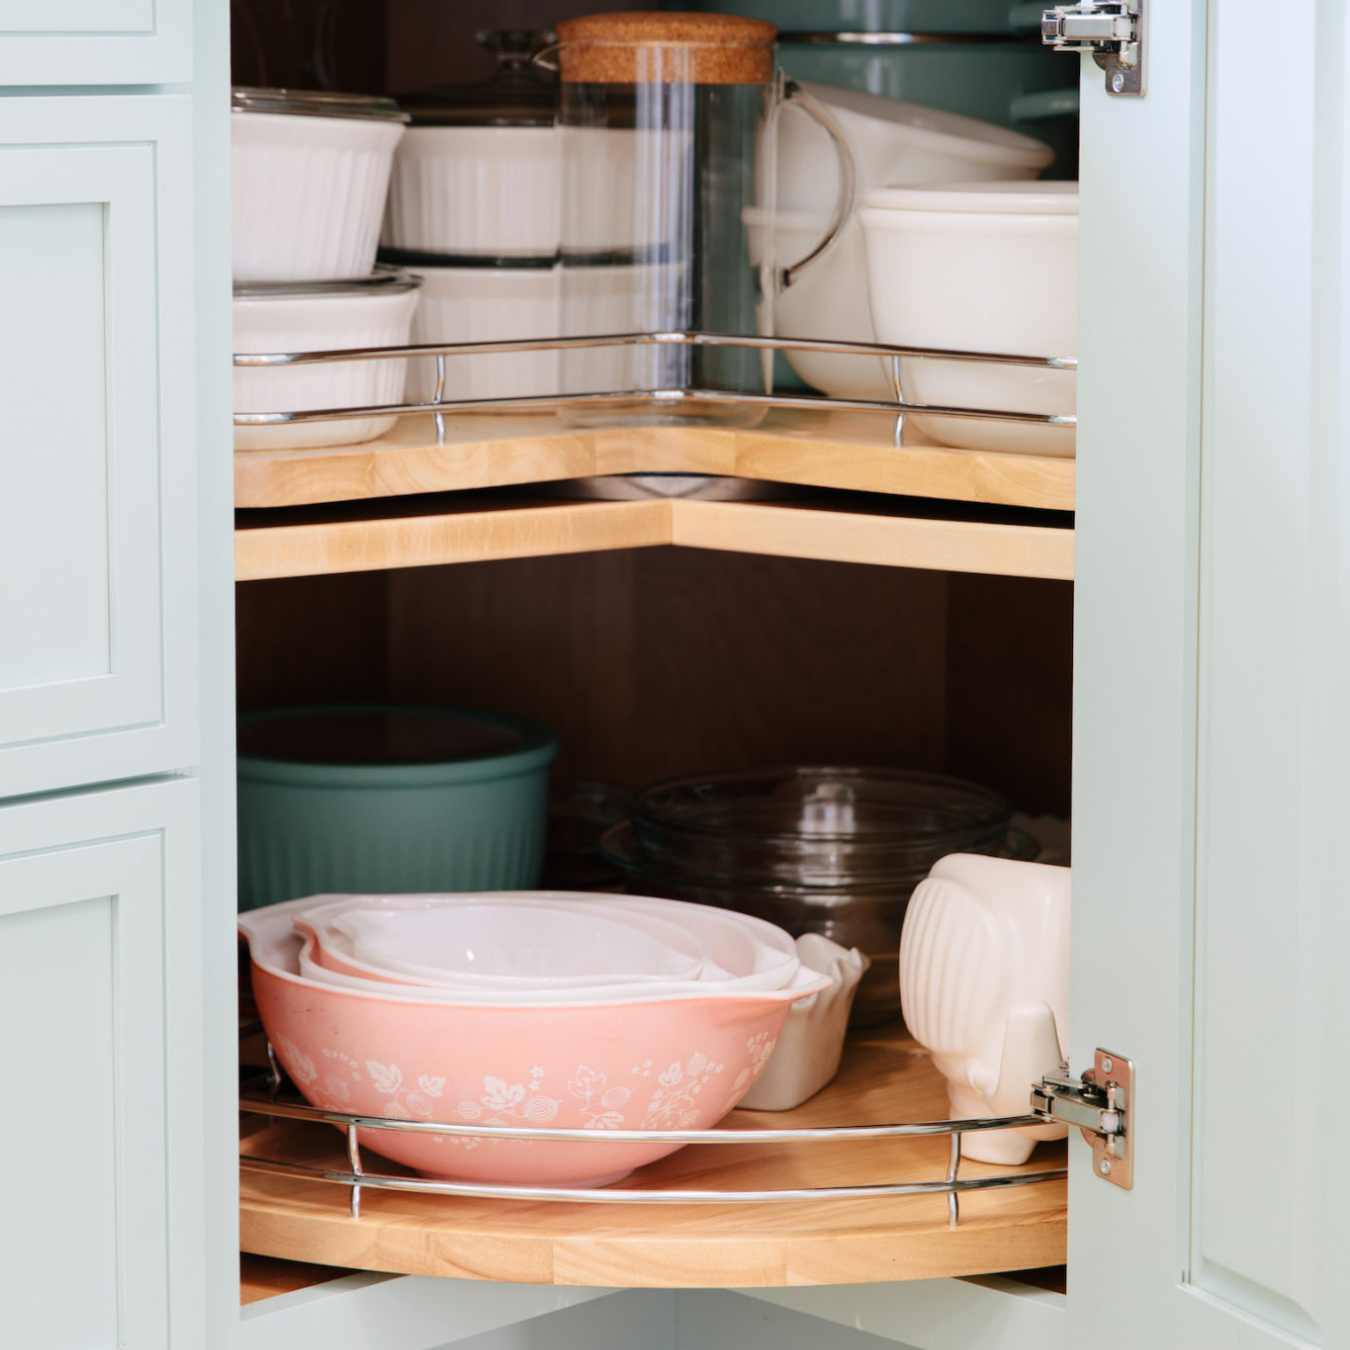 What To Put On A Lazy Susan Cabinet